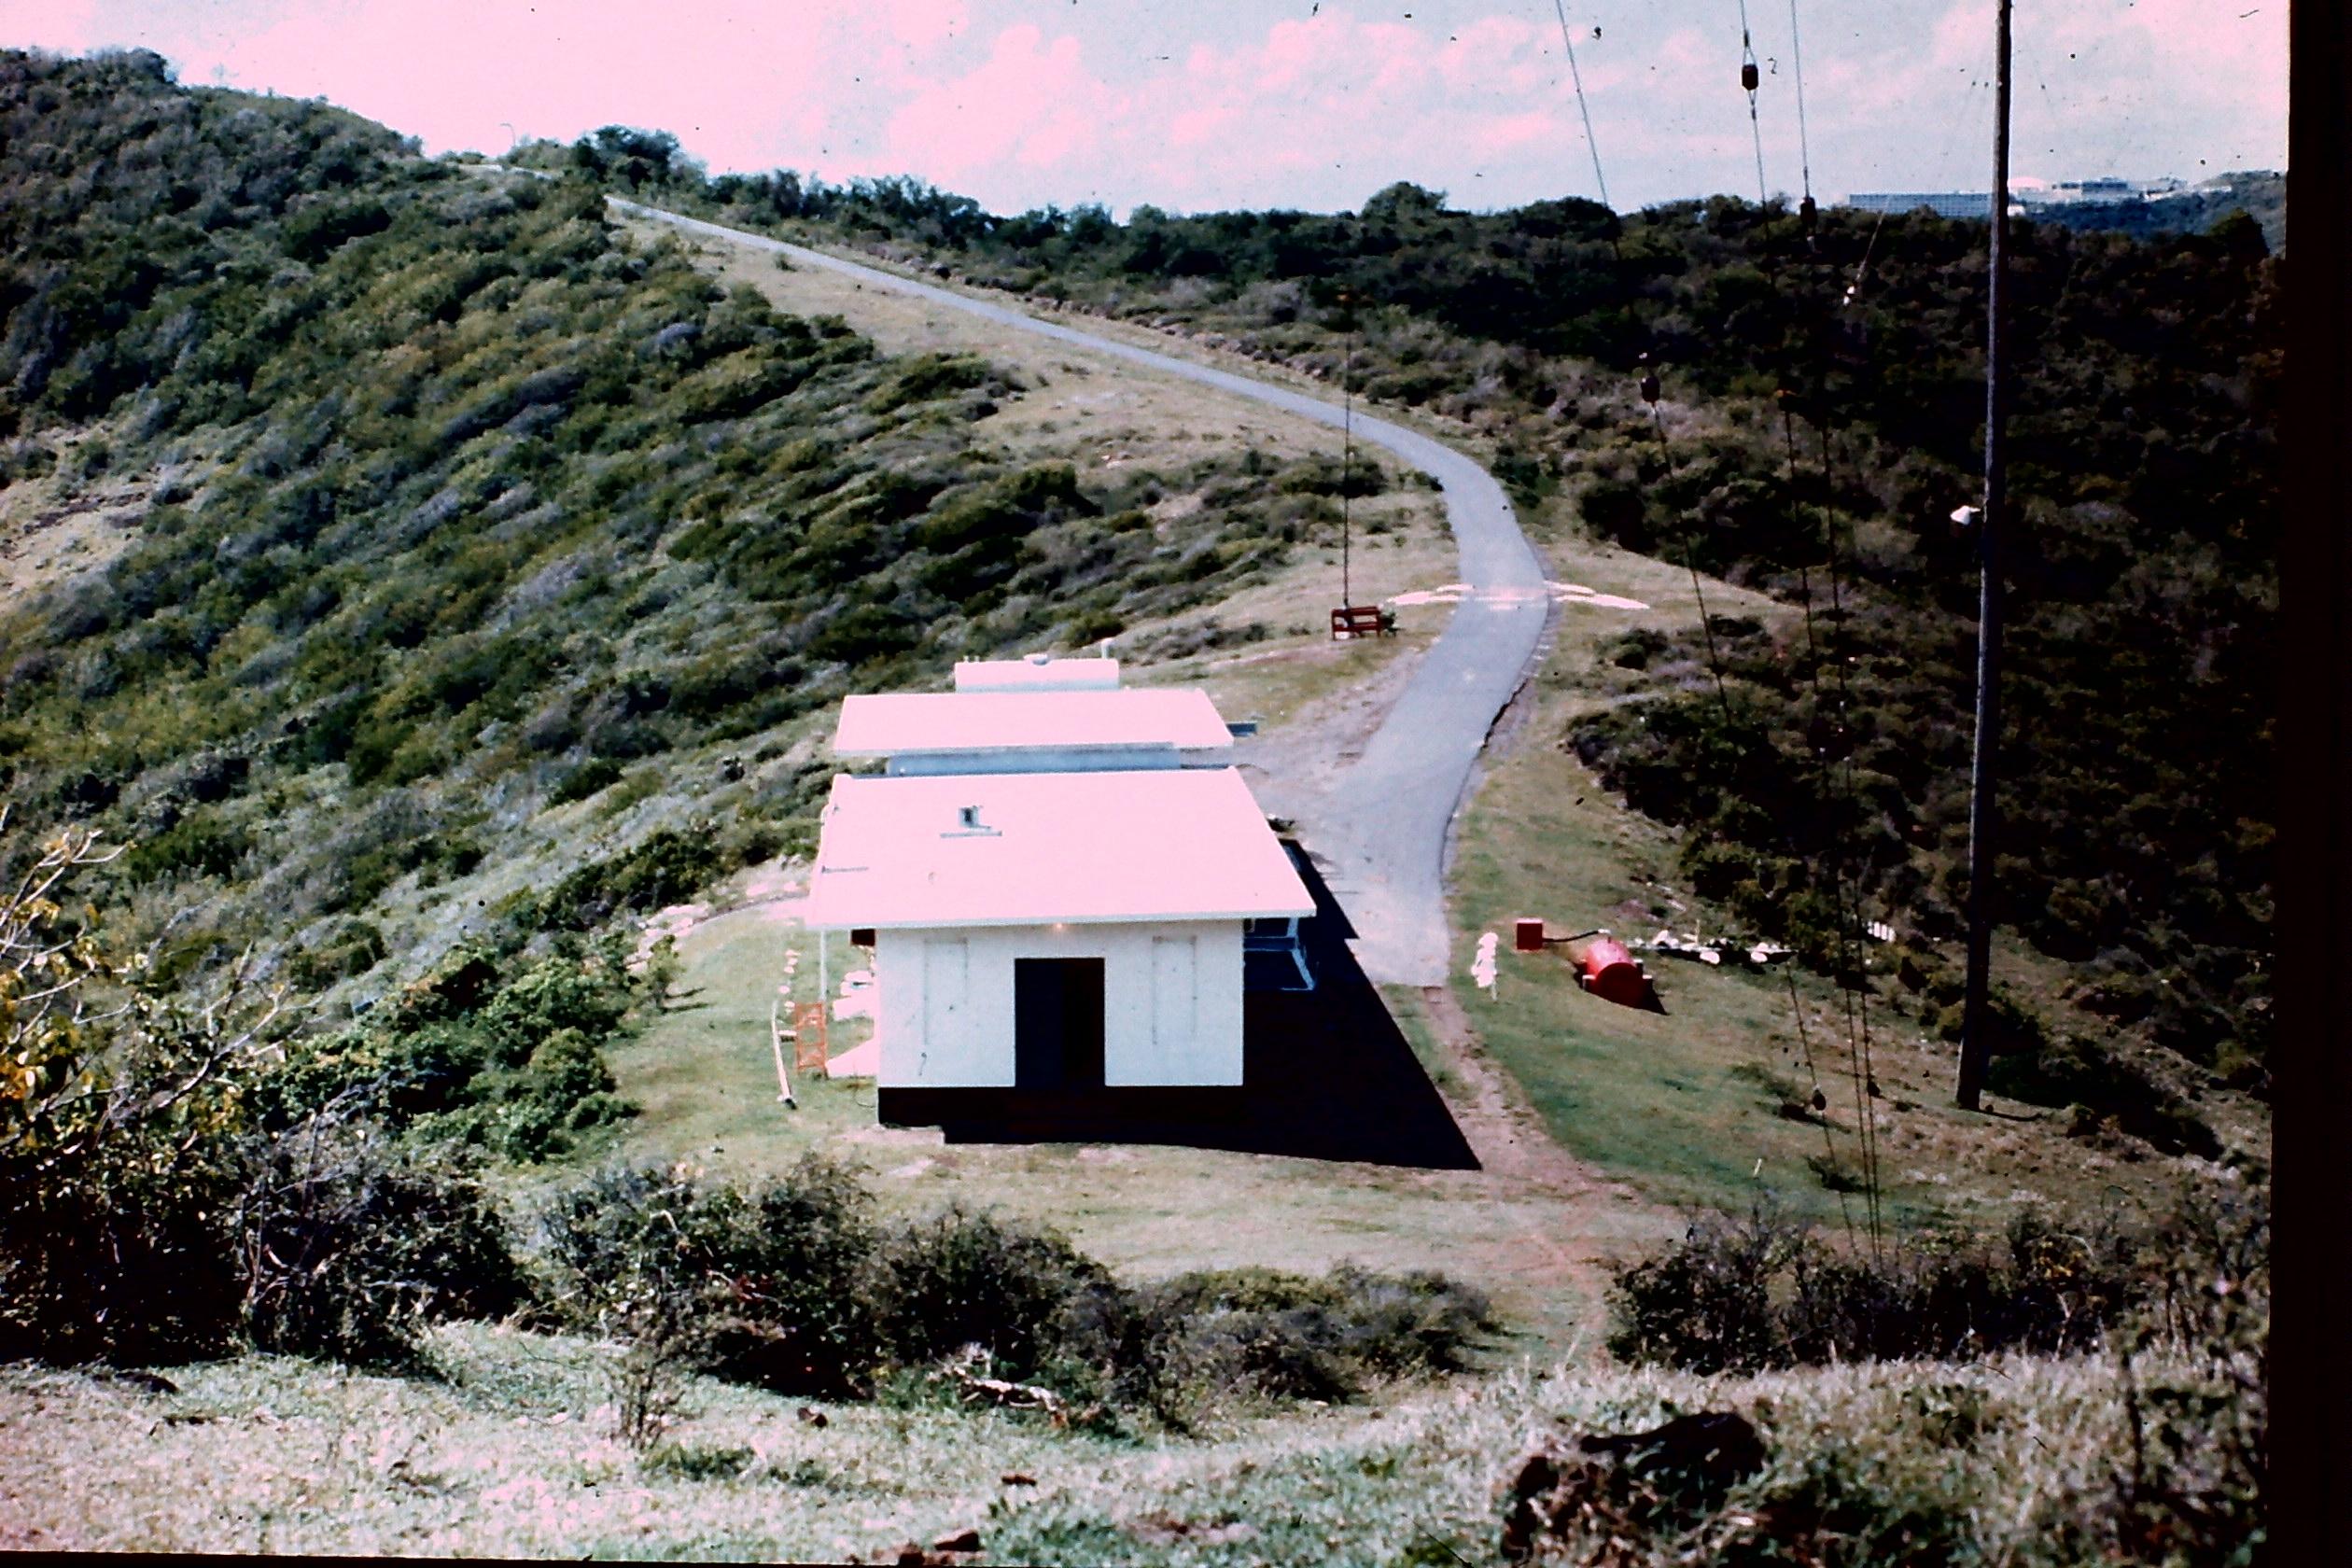 Transmitter building and helopad